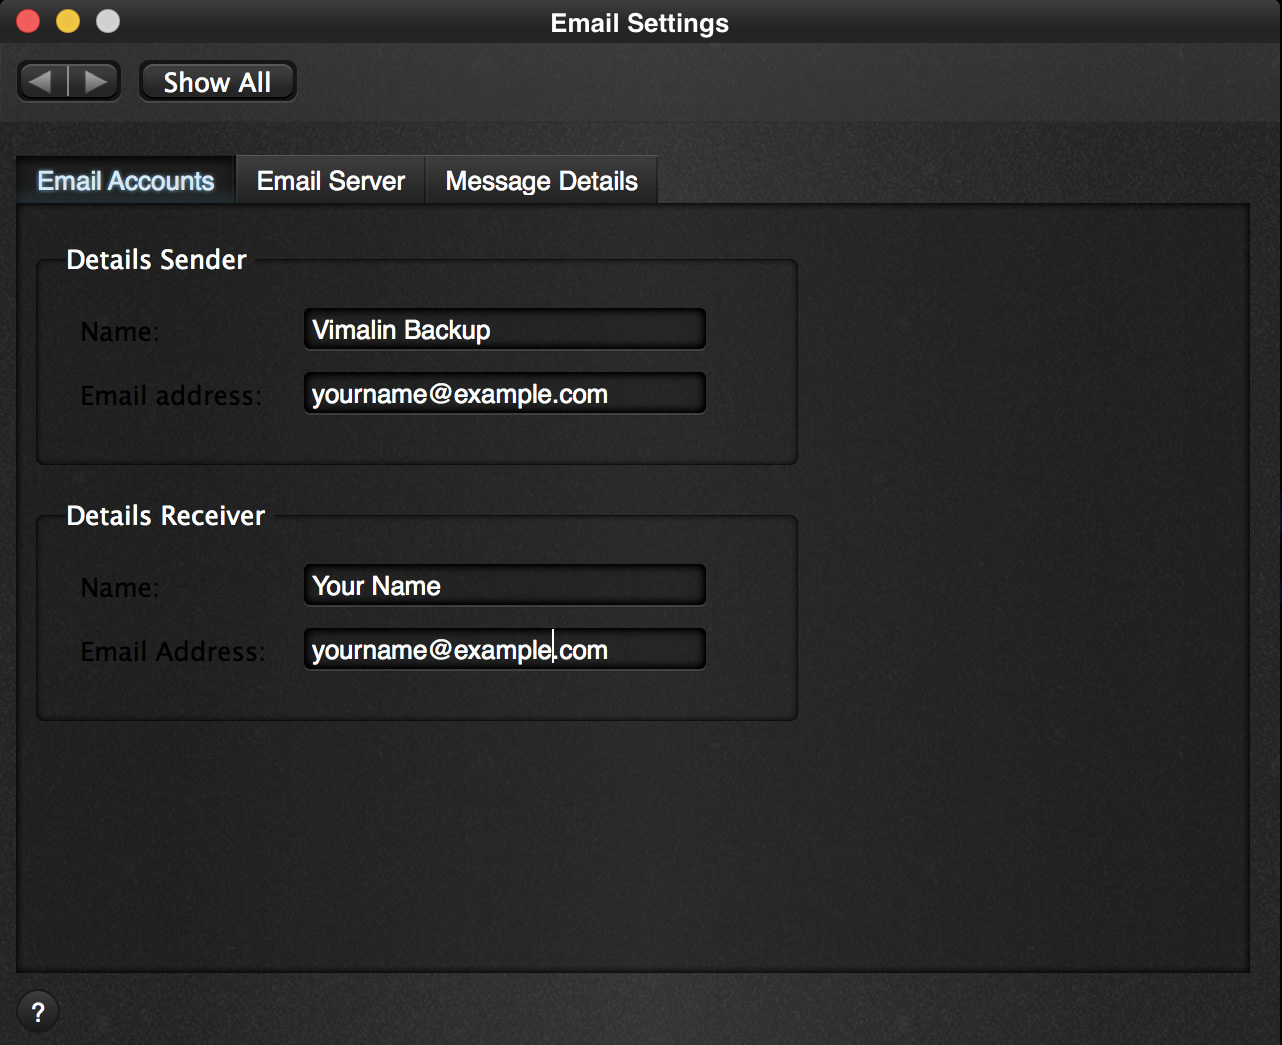 Vimalin Email Settings - Email Accounts 